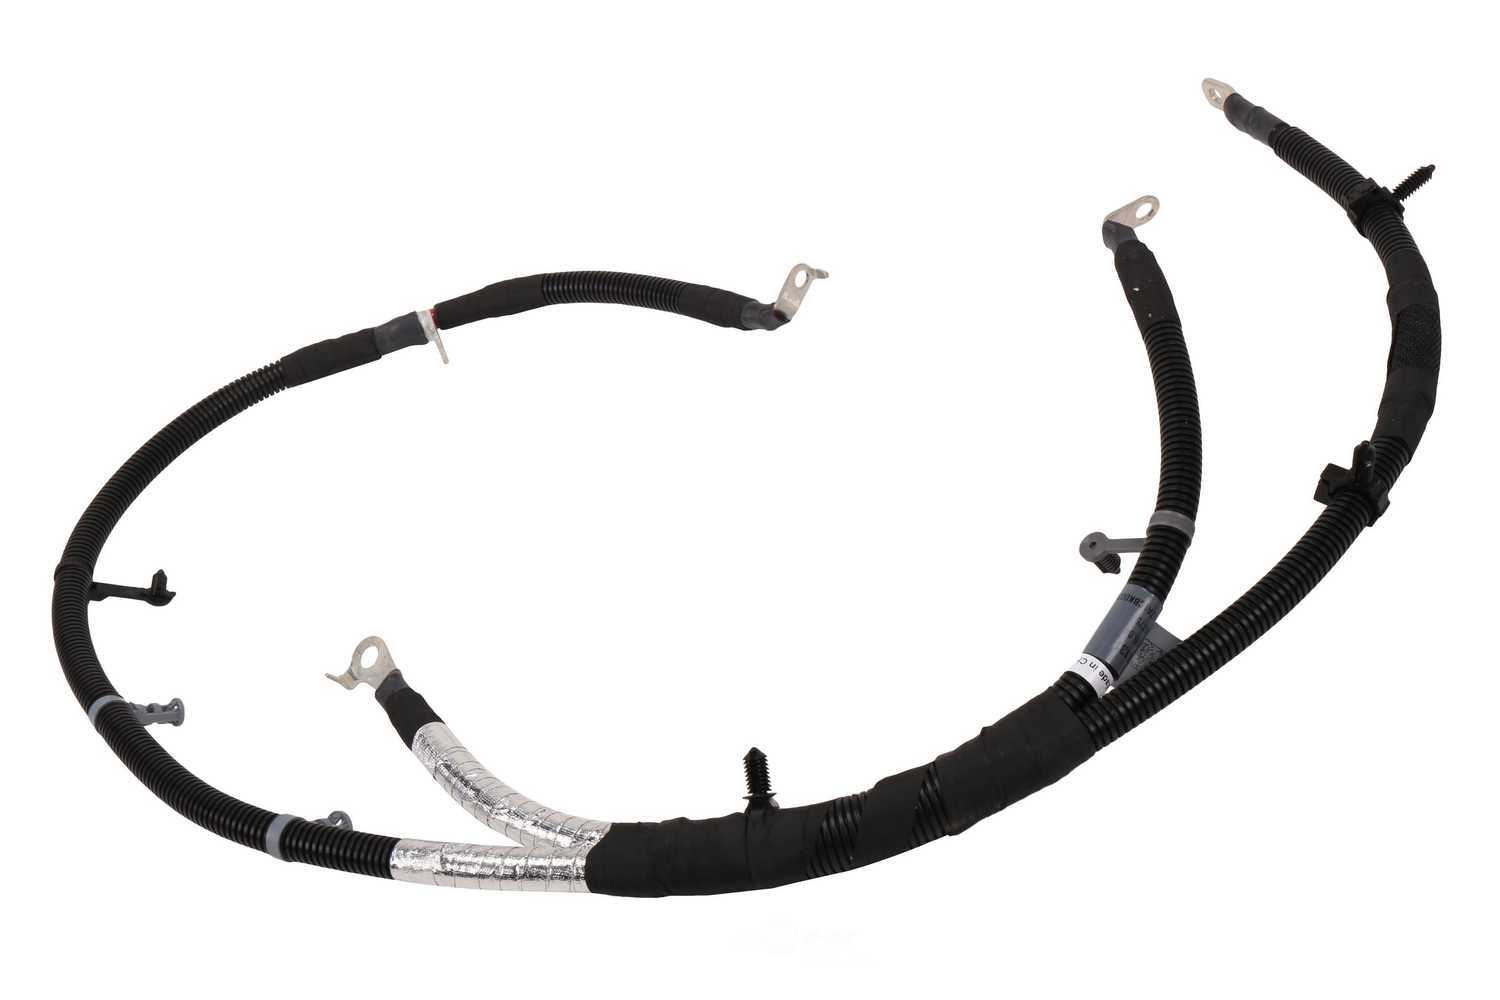 GM GENUINE PARTS - Battery Cable Harness - GMP 84638131